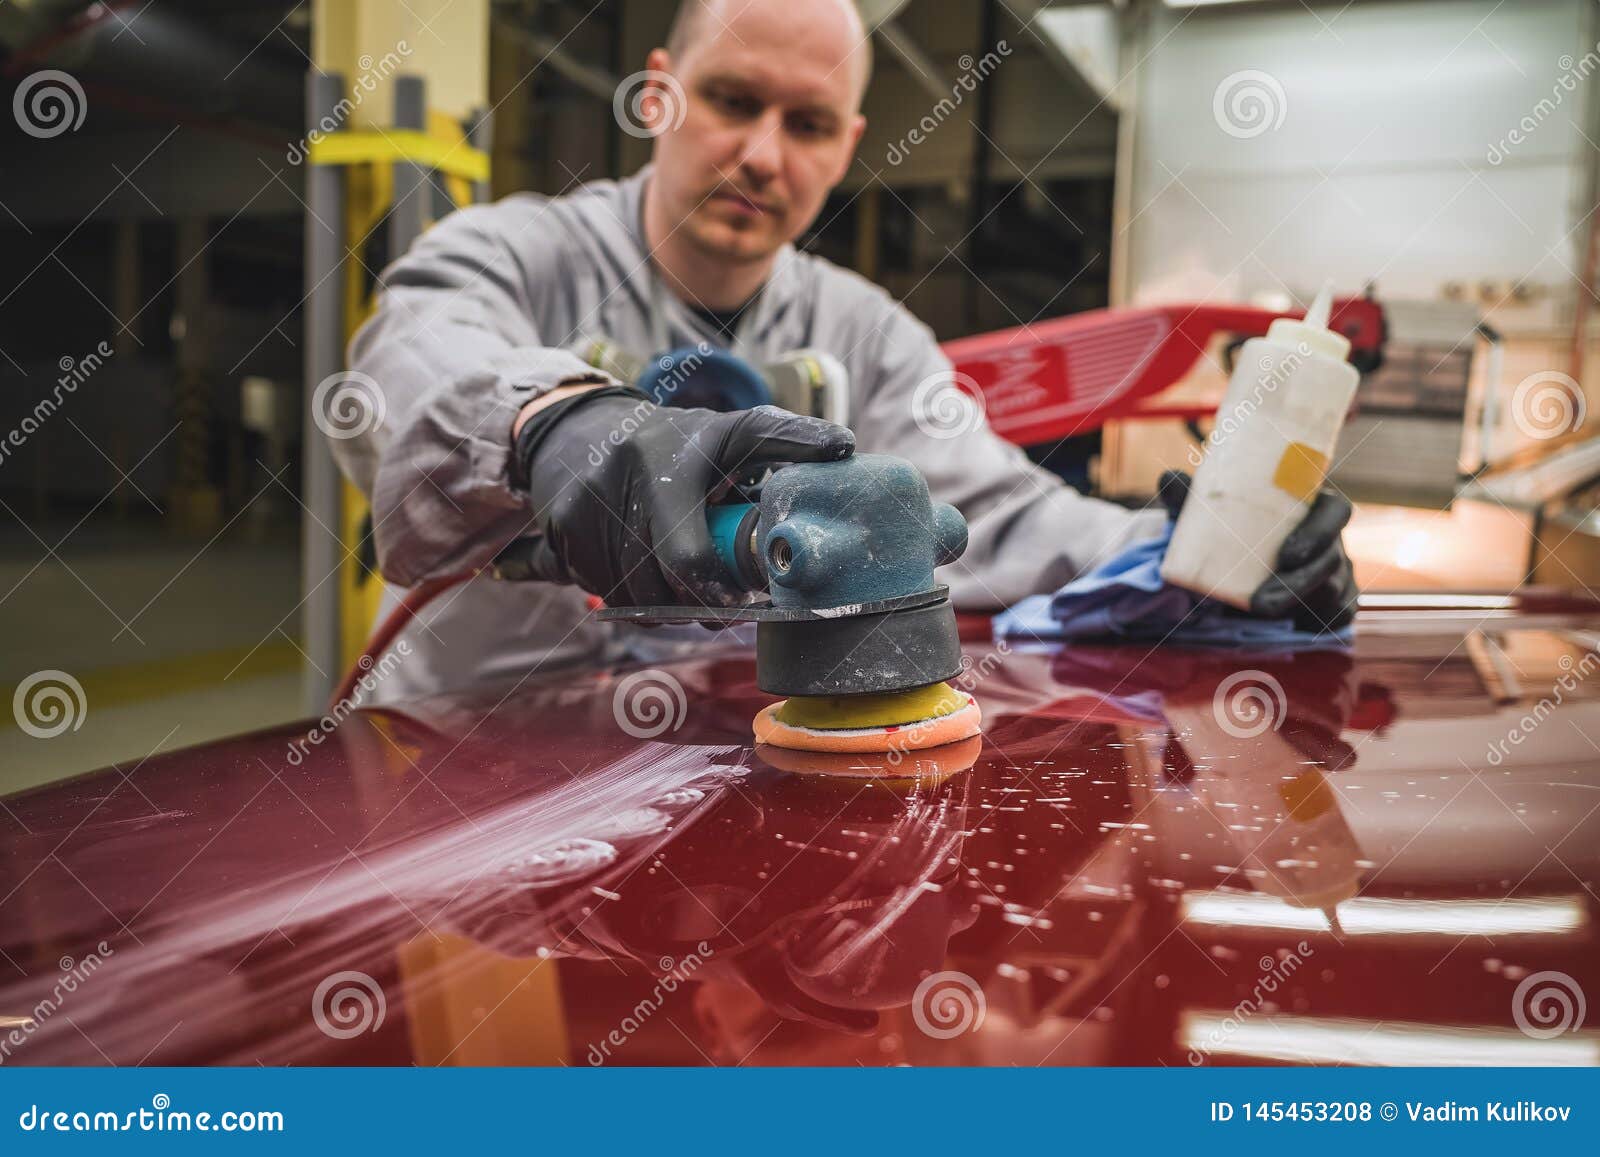 Employee In The Shop Painting The Car Body Polishes